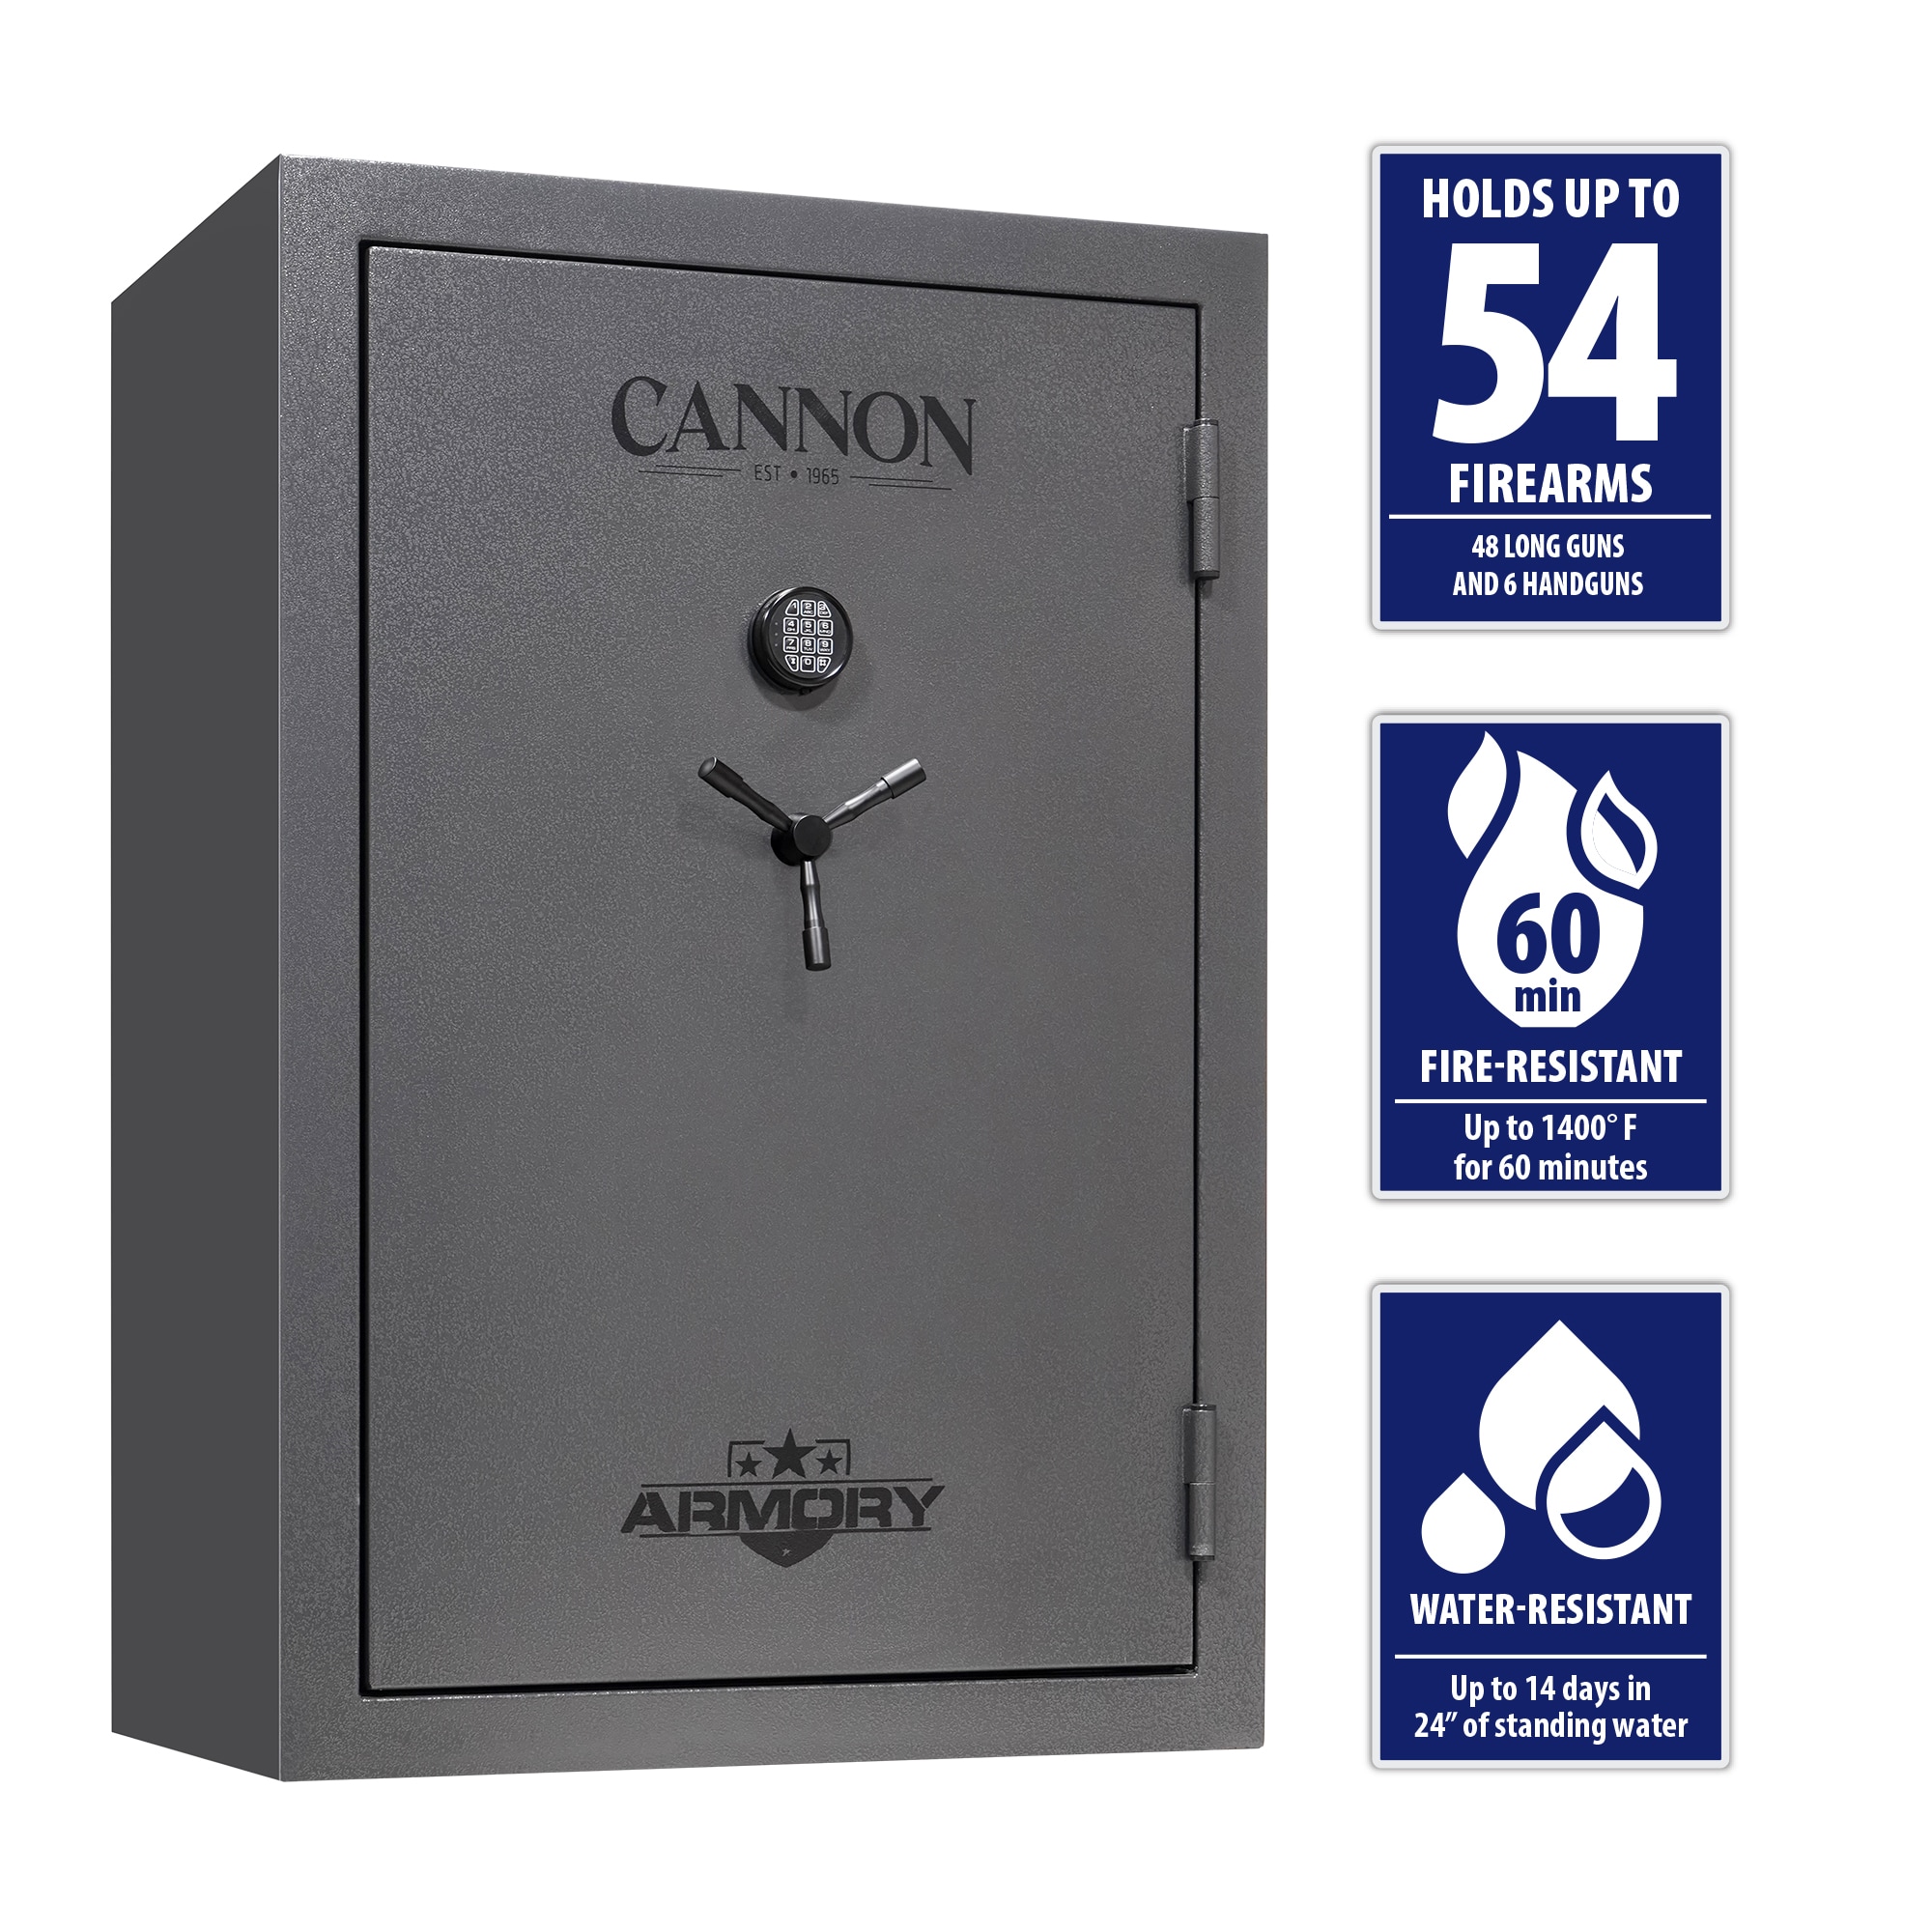 Cannon Armory 48-Gun Fireproof and Waterproof Electronic/Keypad